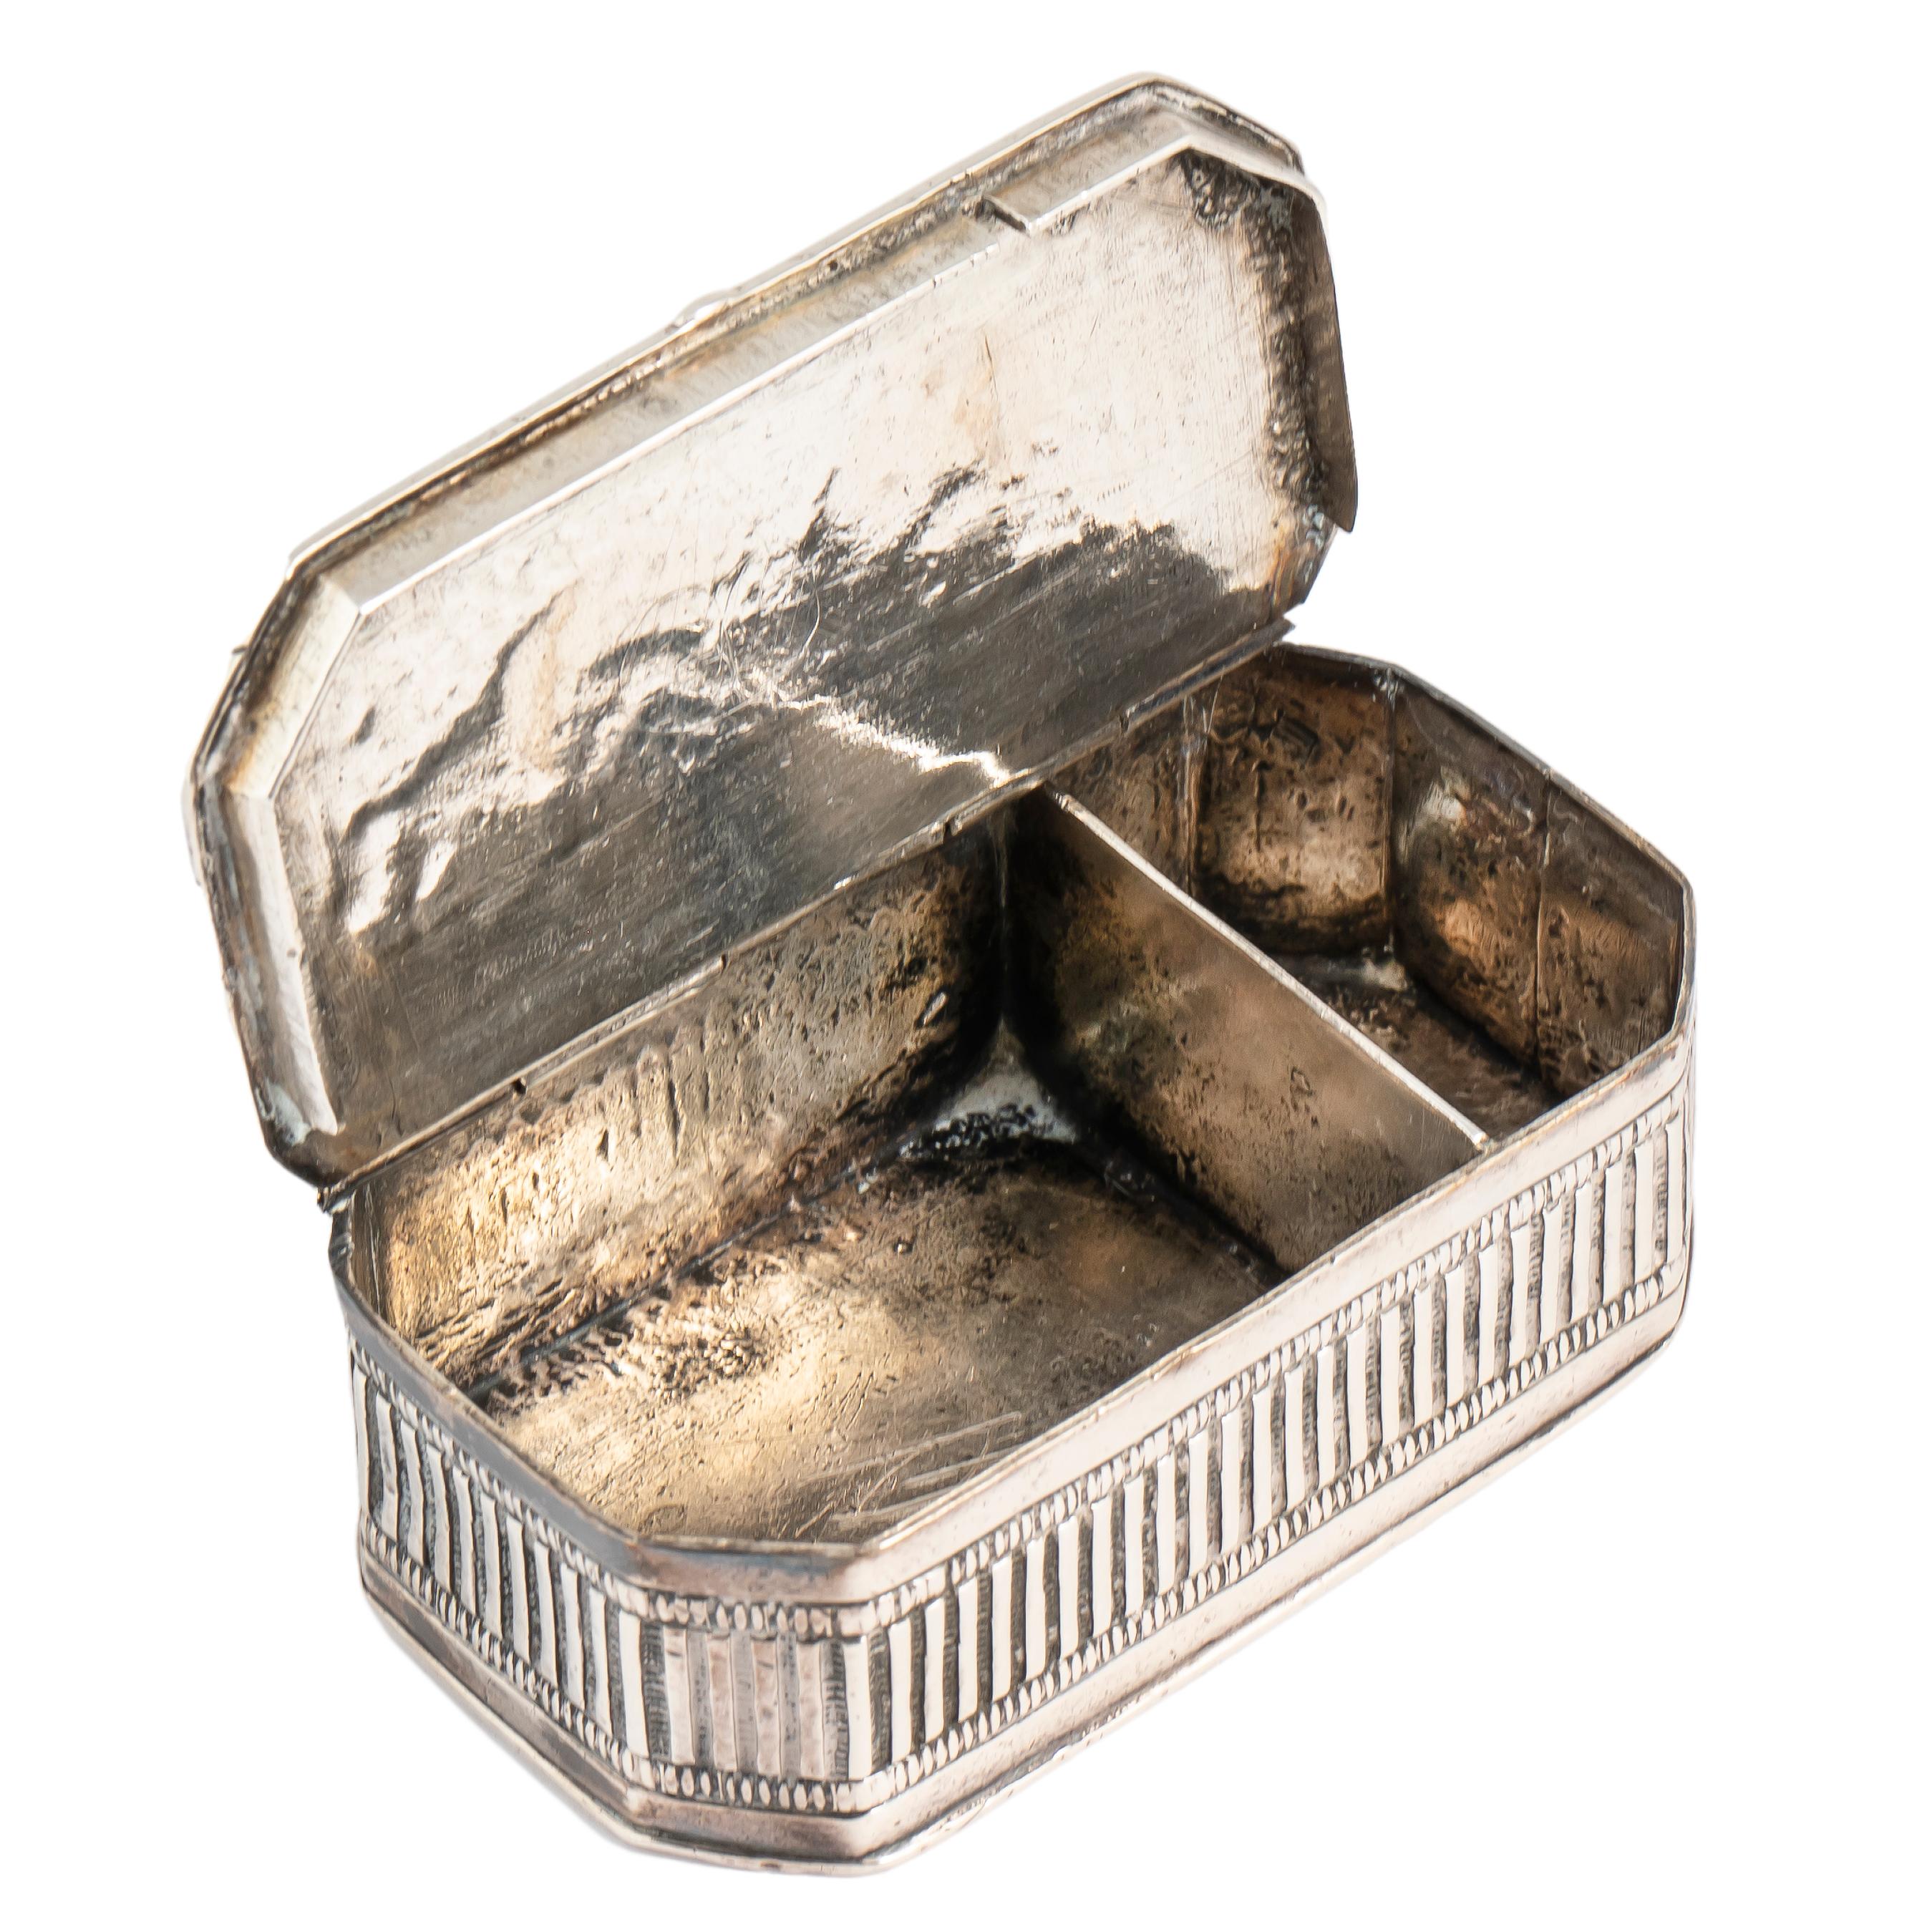 Engraved Silver Trinket Box with Chinese Scene, Late 19th-Early 20th Century For Sale